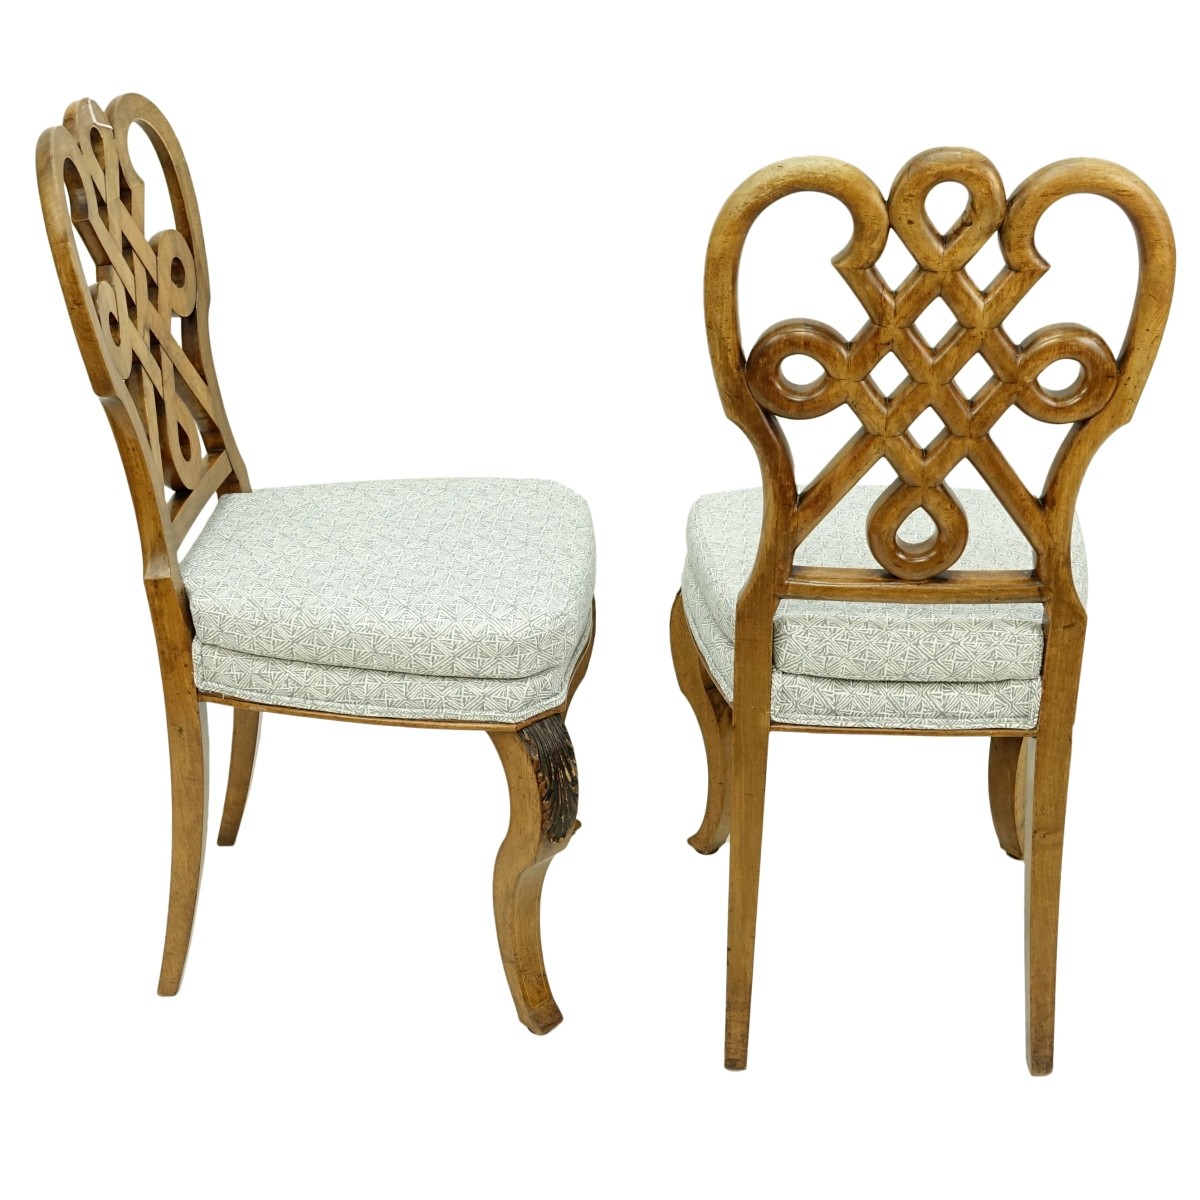 Pair of Ribbon Chairs